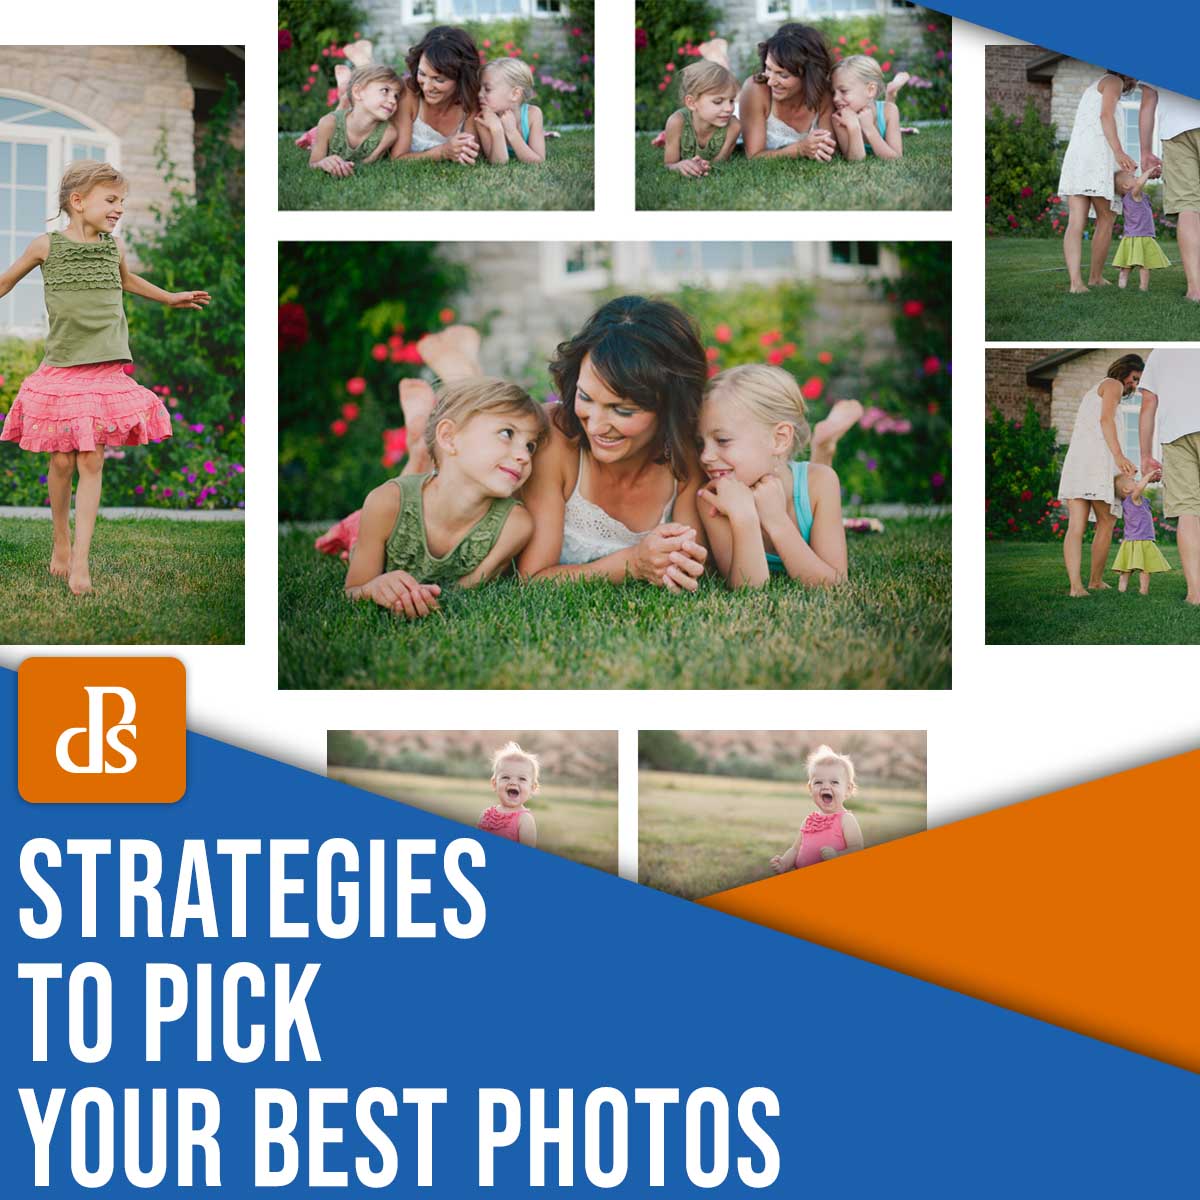 strategies to pick your best photos: choosing pictures